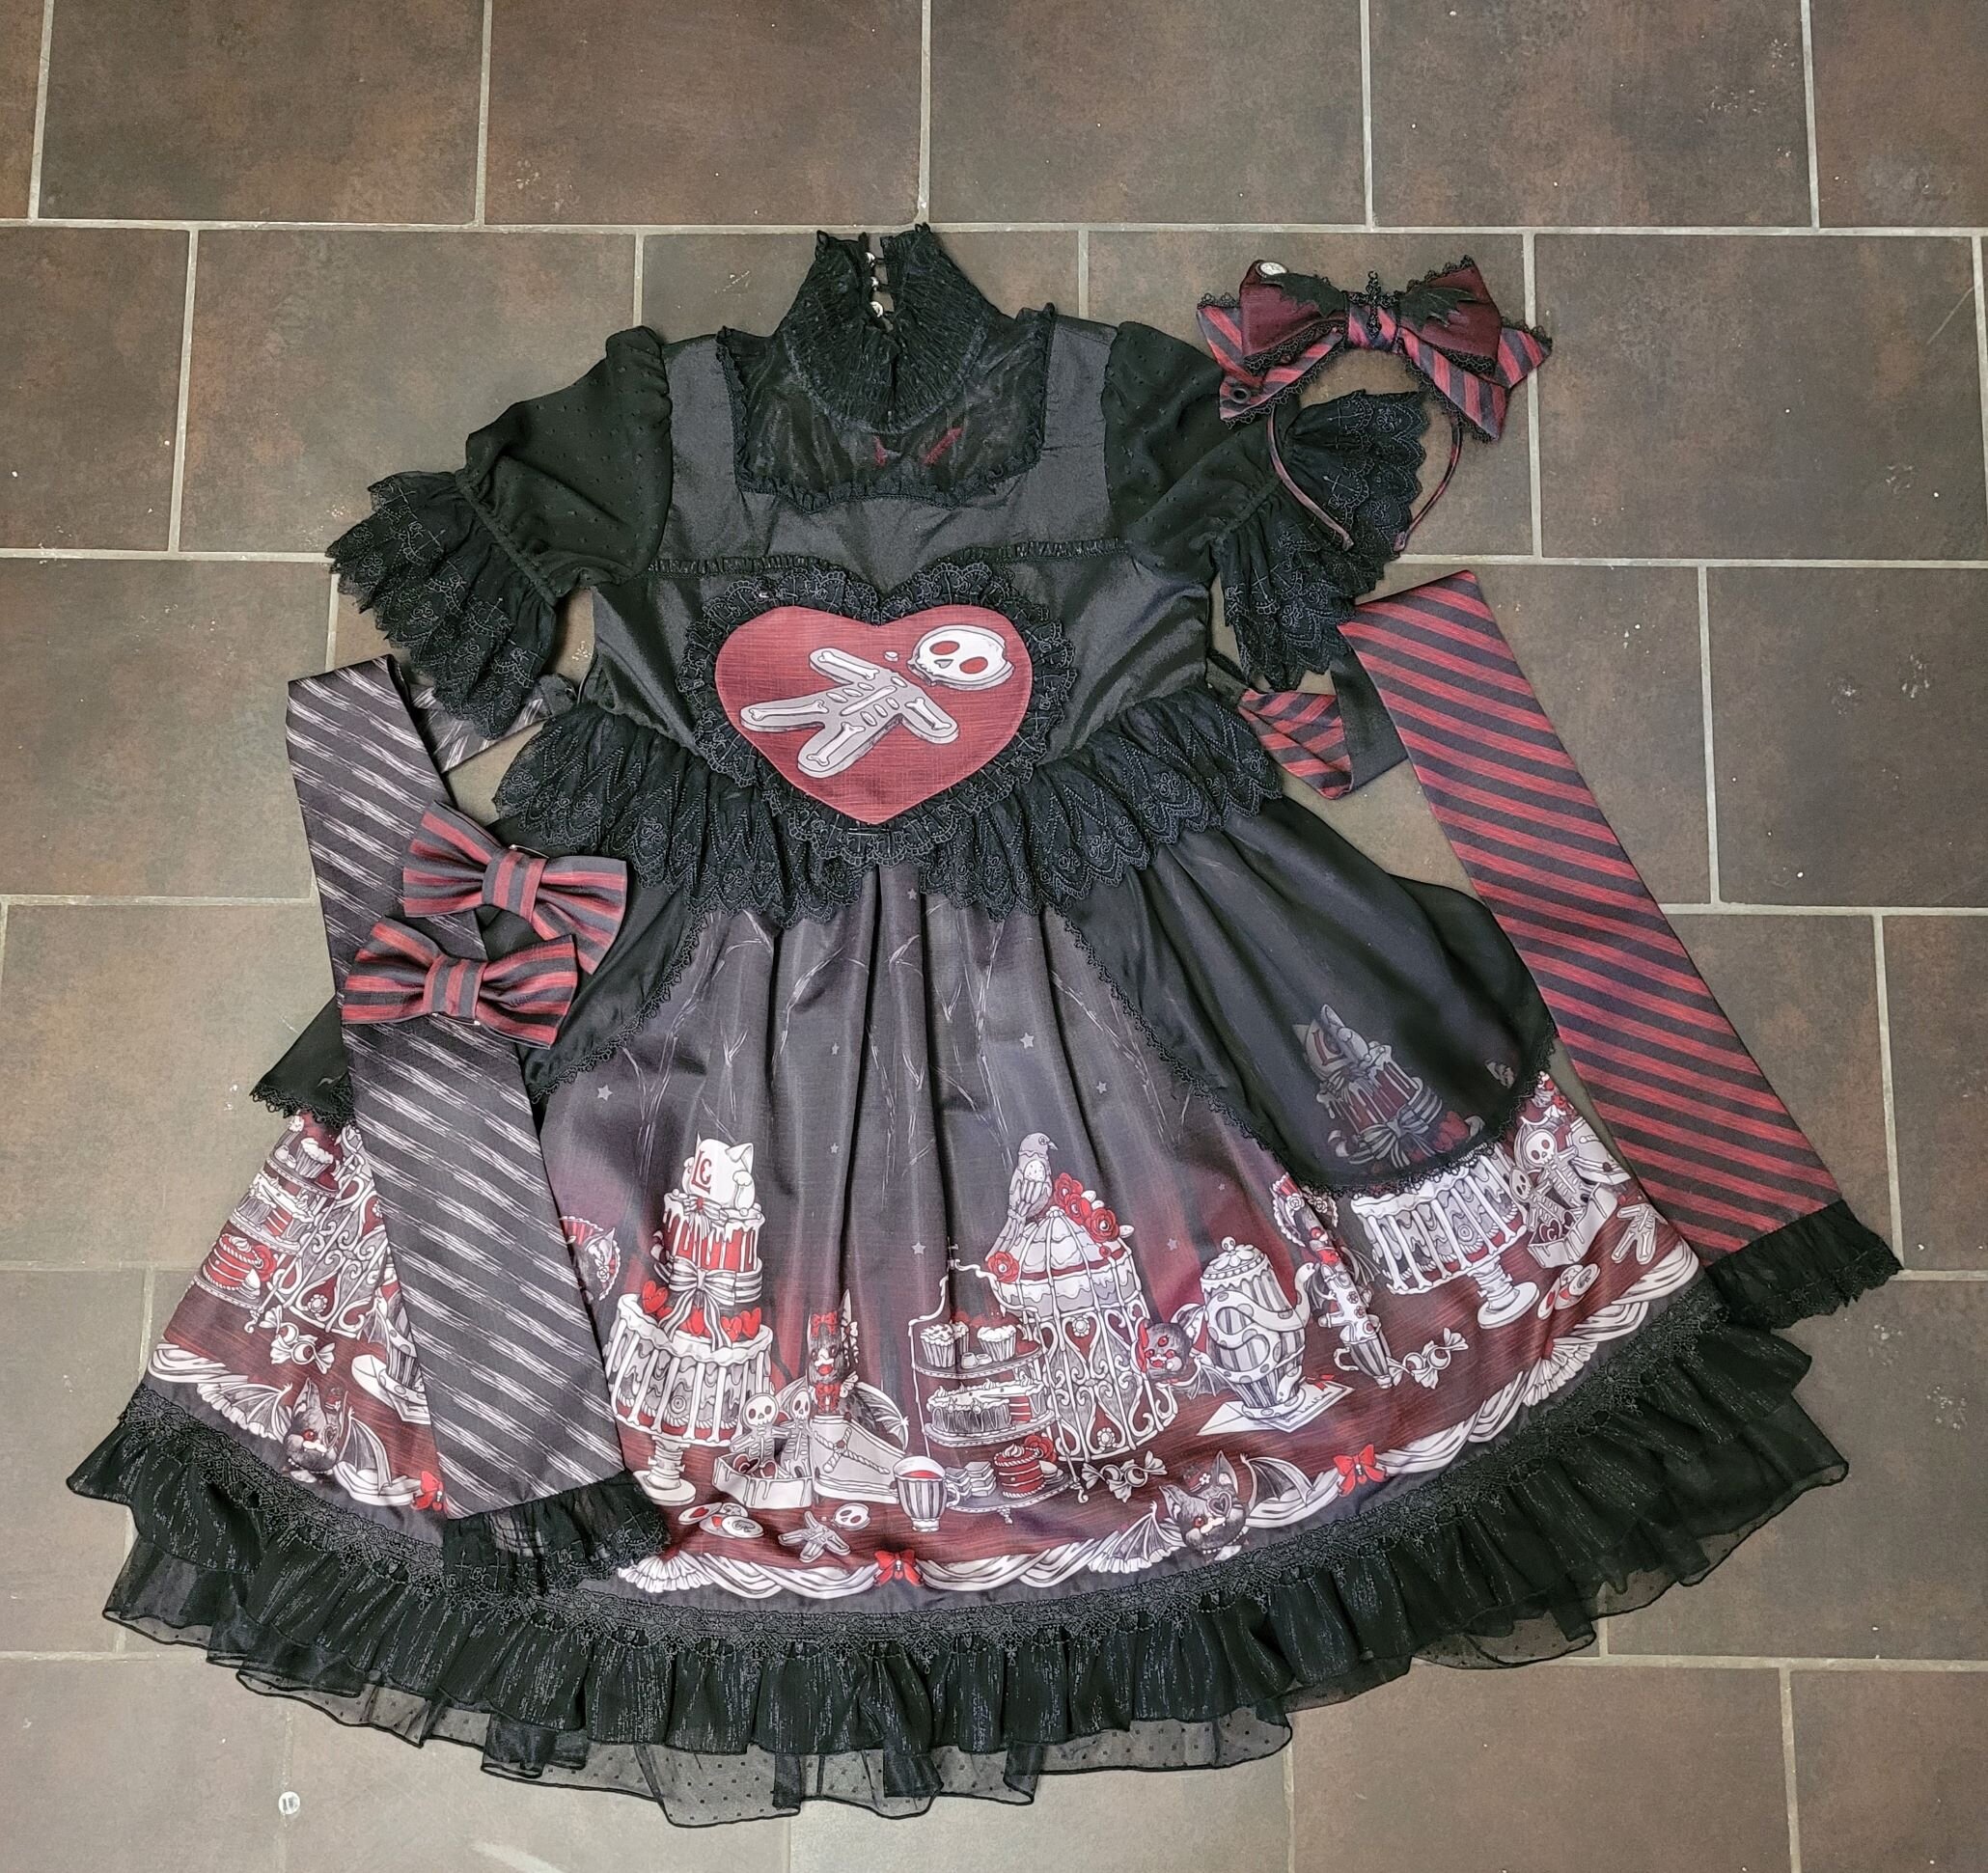 Pointywitchshoes Lolita Wardrobe 2021 — Mhoontown Goods